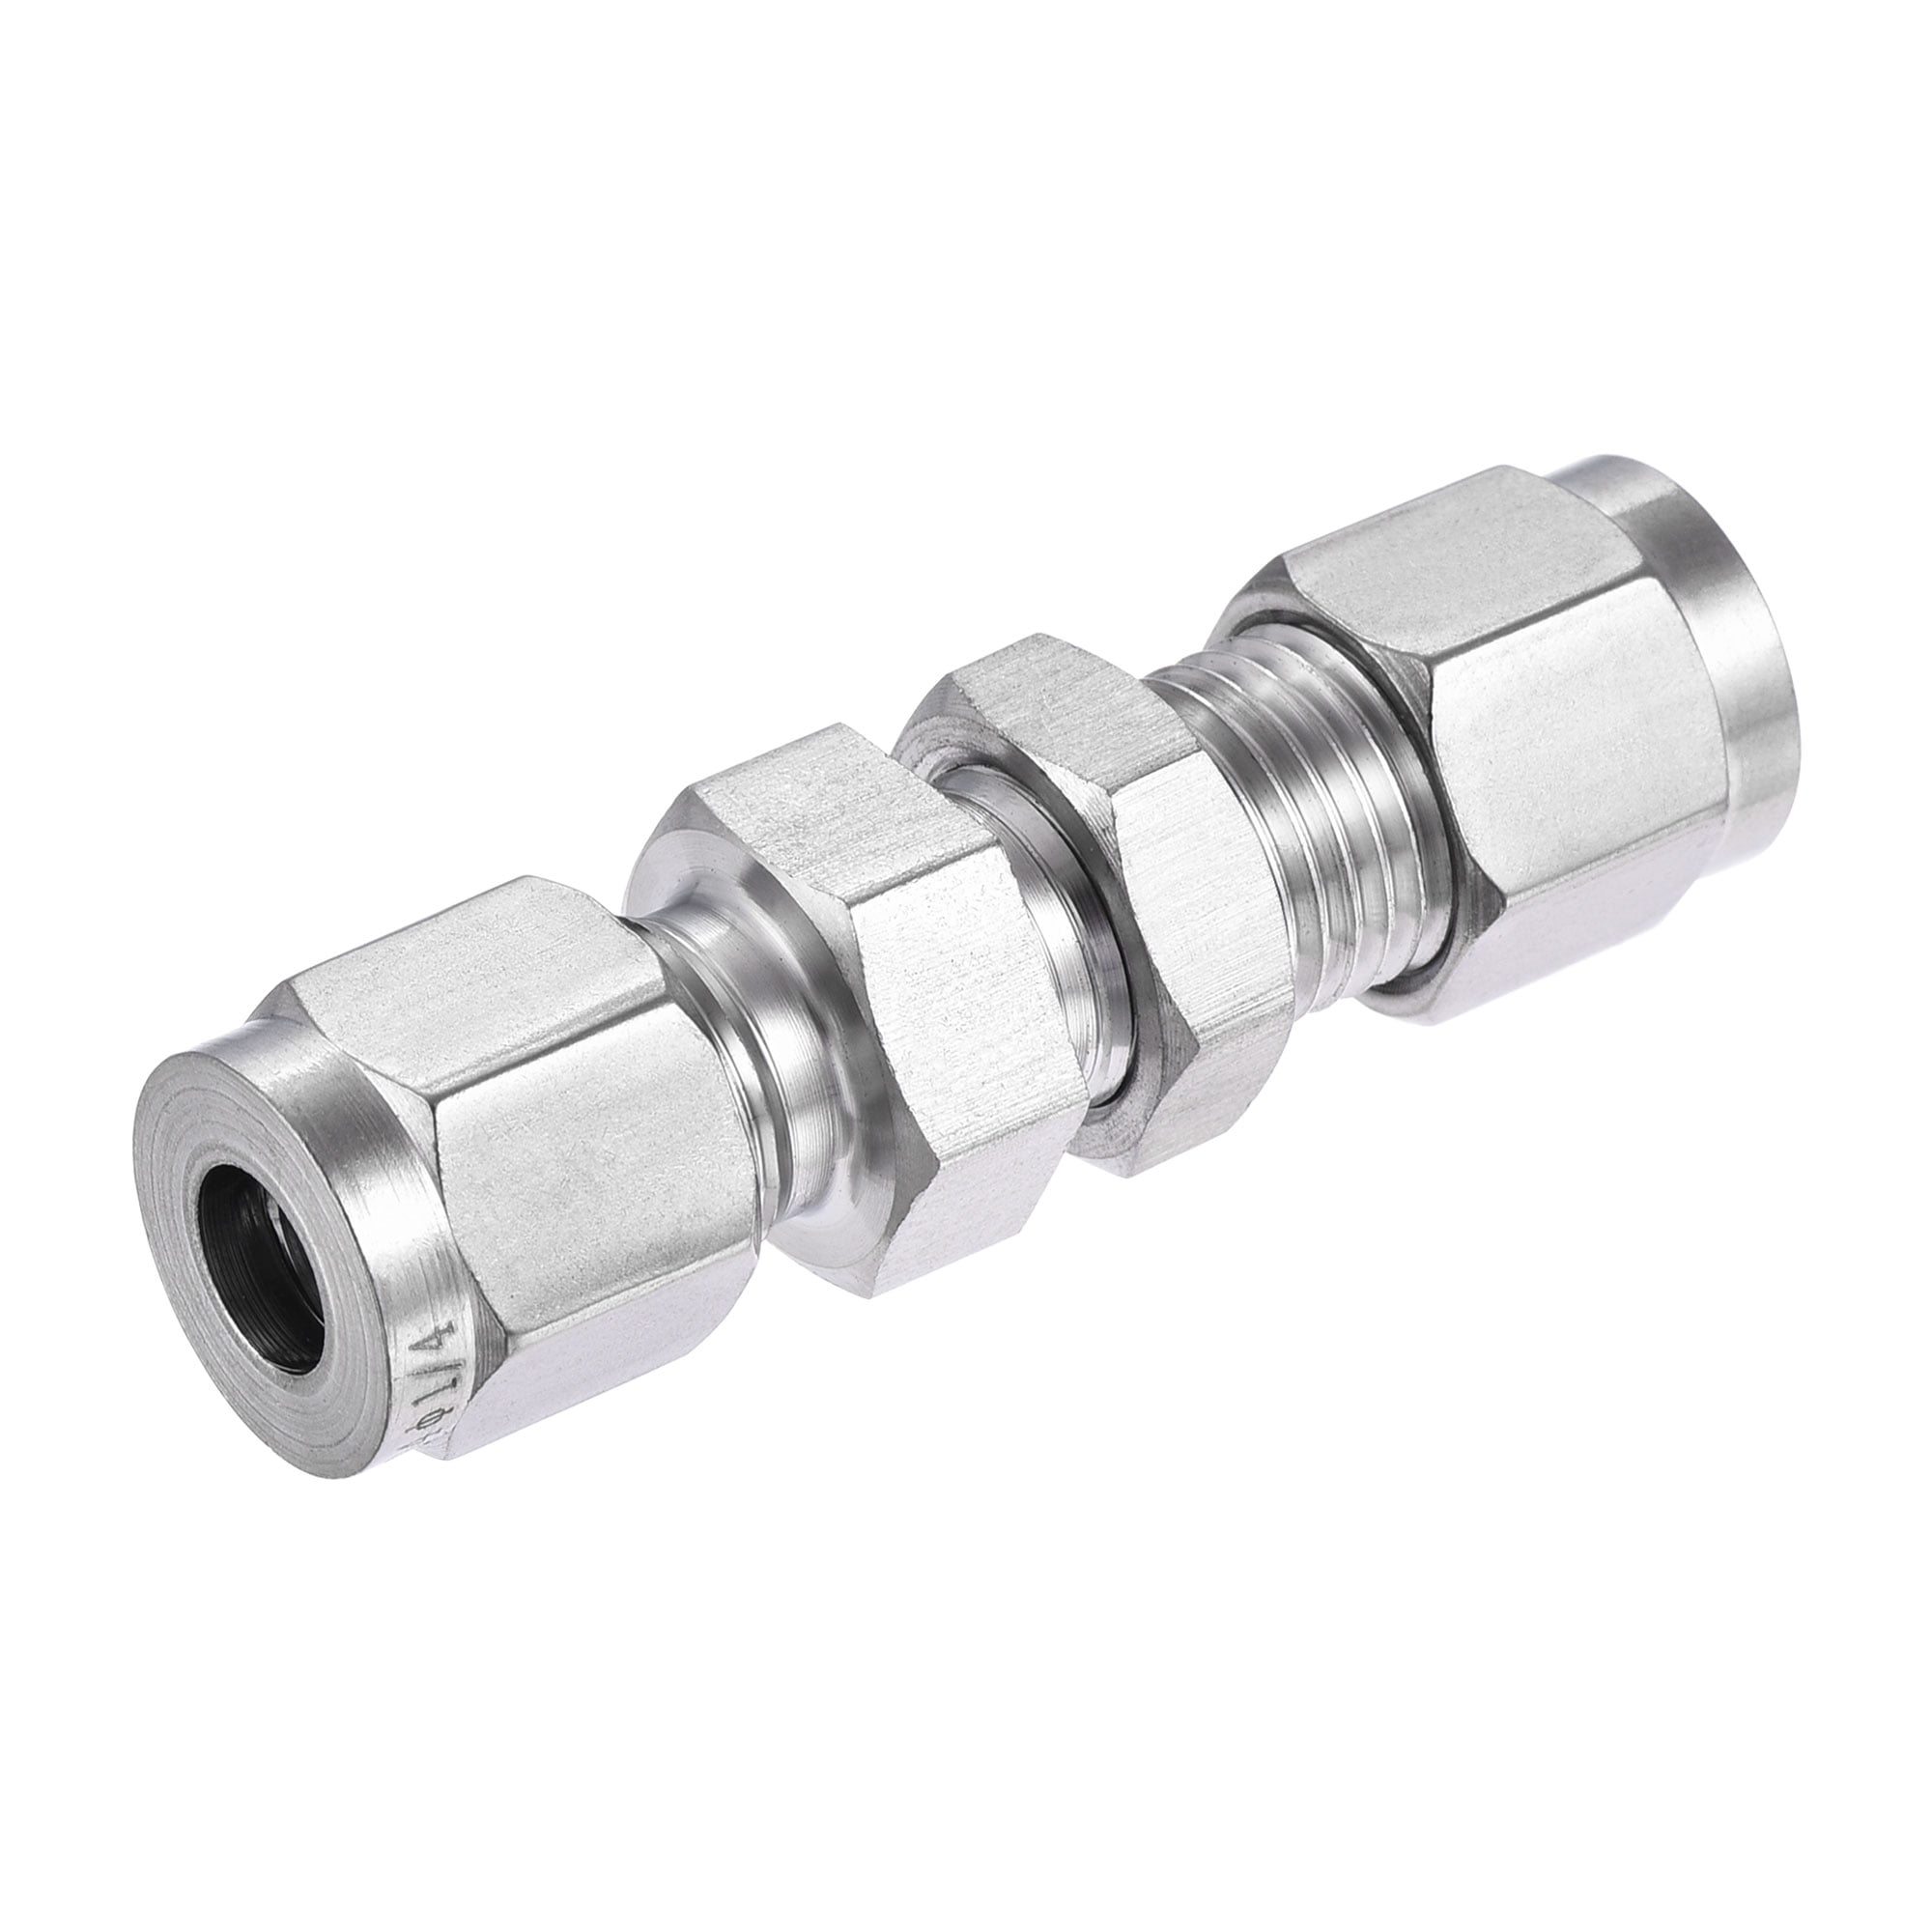 Fit 14mm Tube 304 Stainless Steel End Cap Compression Fitting Tube Connector 